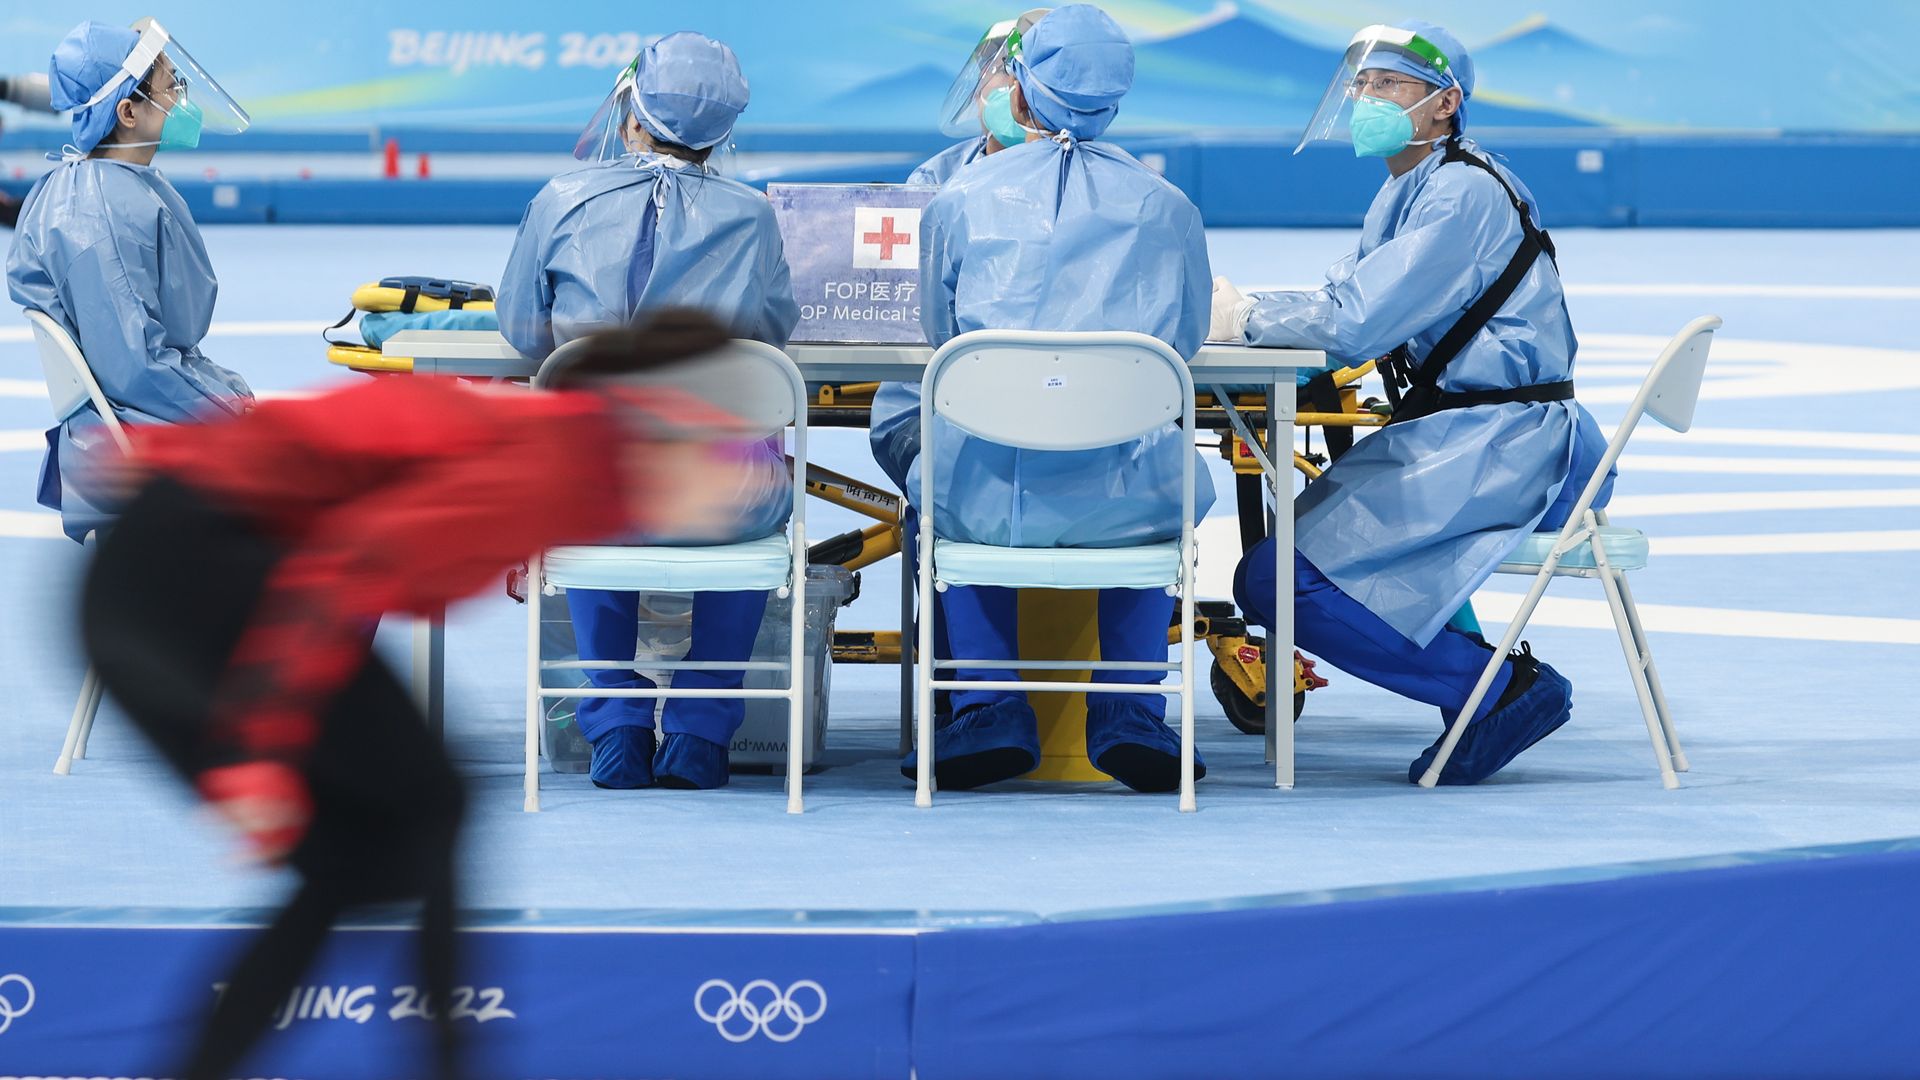 Healthcare workers are seen during women's 3000m speed skating race during the Beijing 2022 Winter Olympic Games at the National Speed Skating Oval 